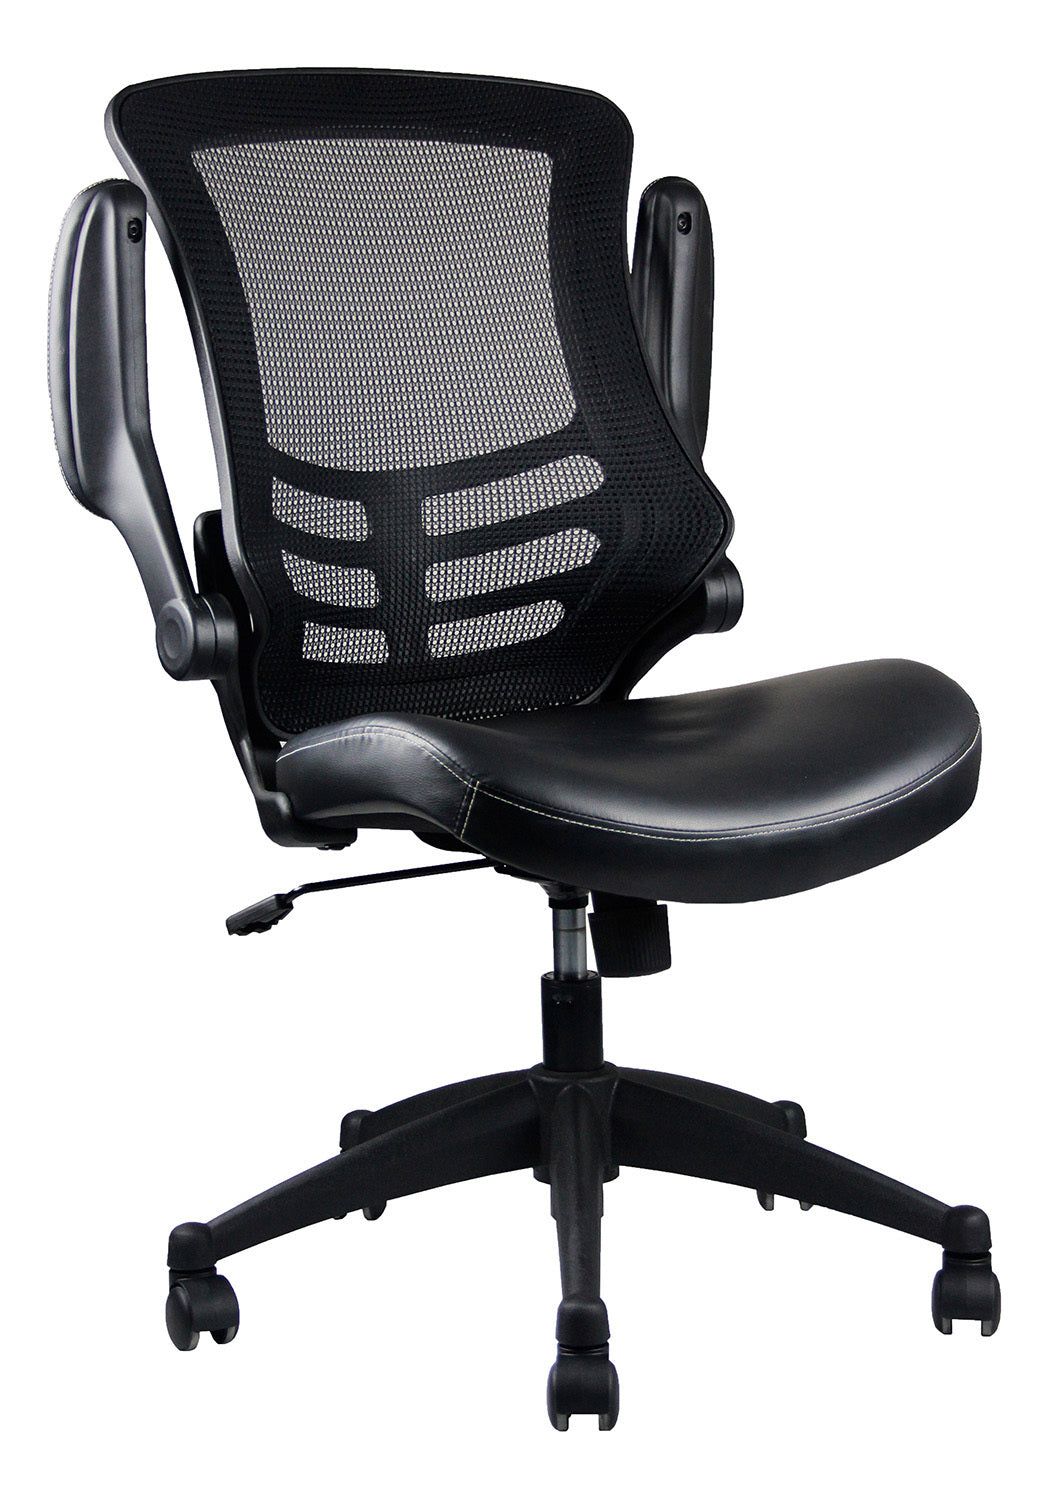 Mobili Stylish Mid-Back Mesh Office Chair with Adjustable Arms, Black